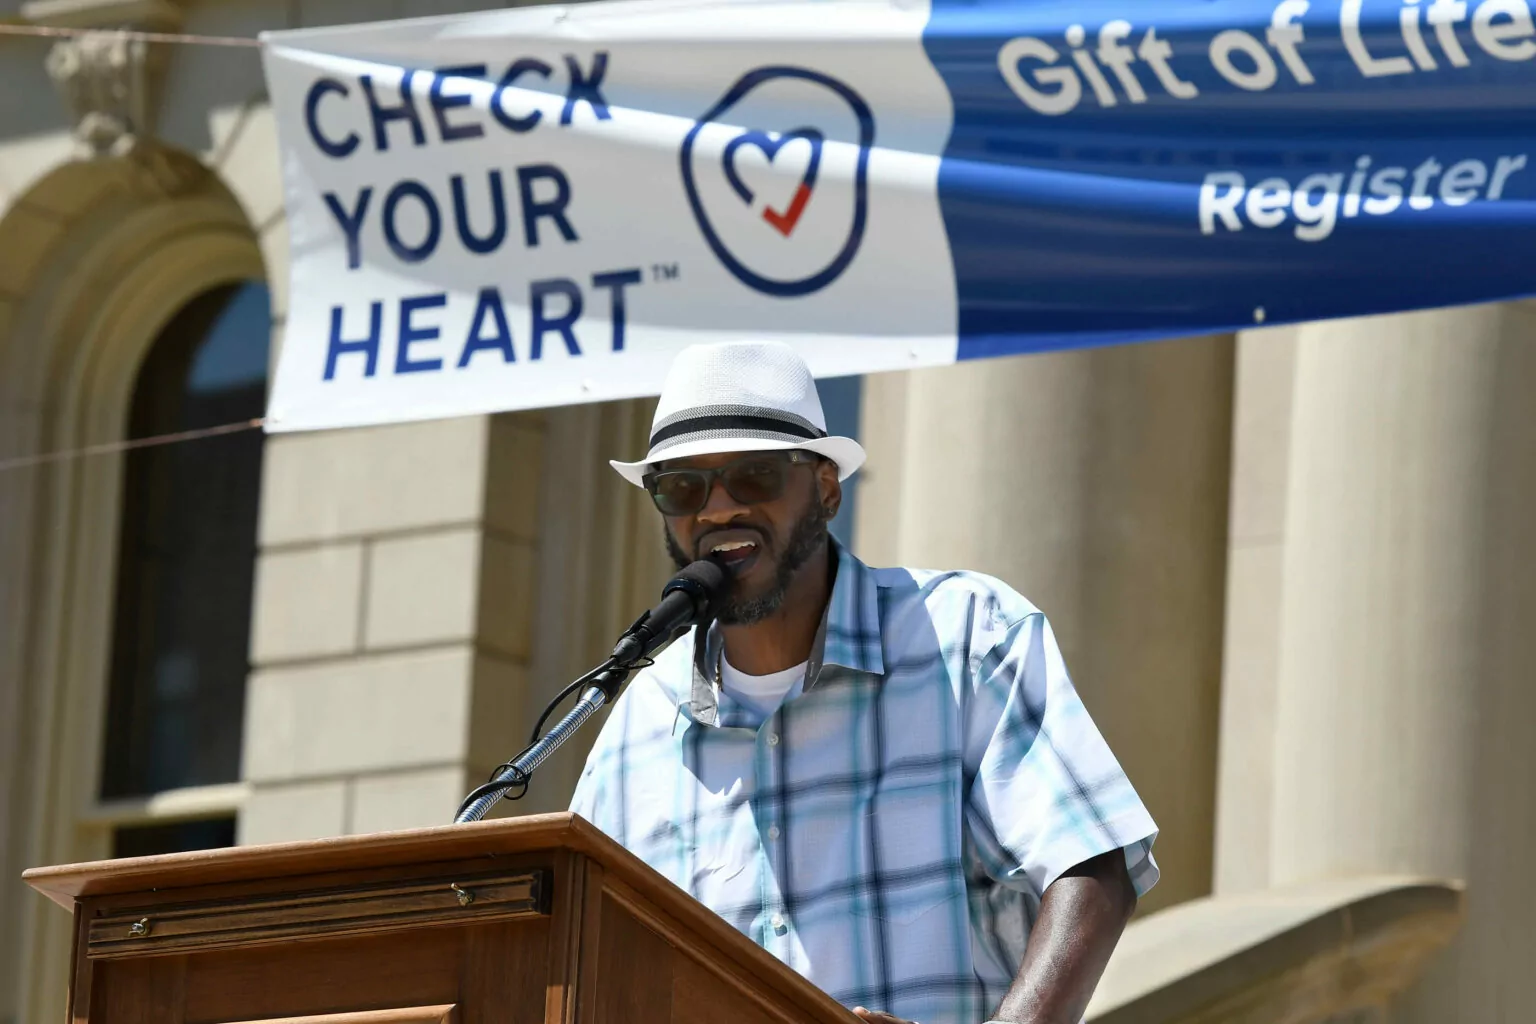 Donor father John Edmond at the podium on the Capitol Steps with a Check Your Heart banner behind him